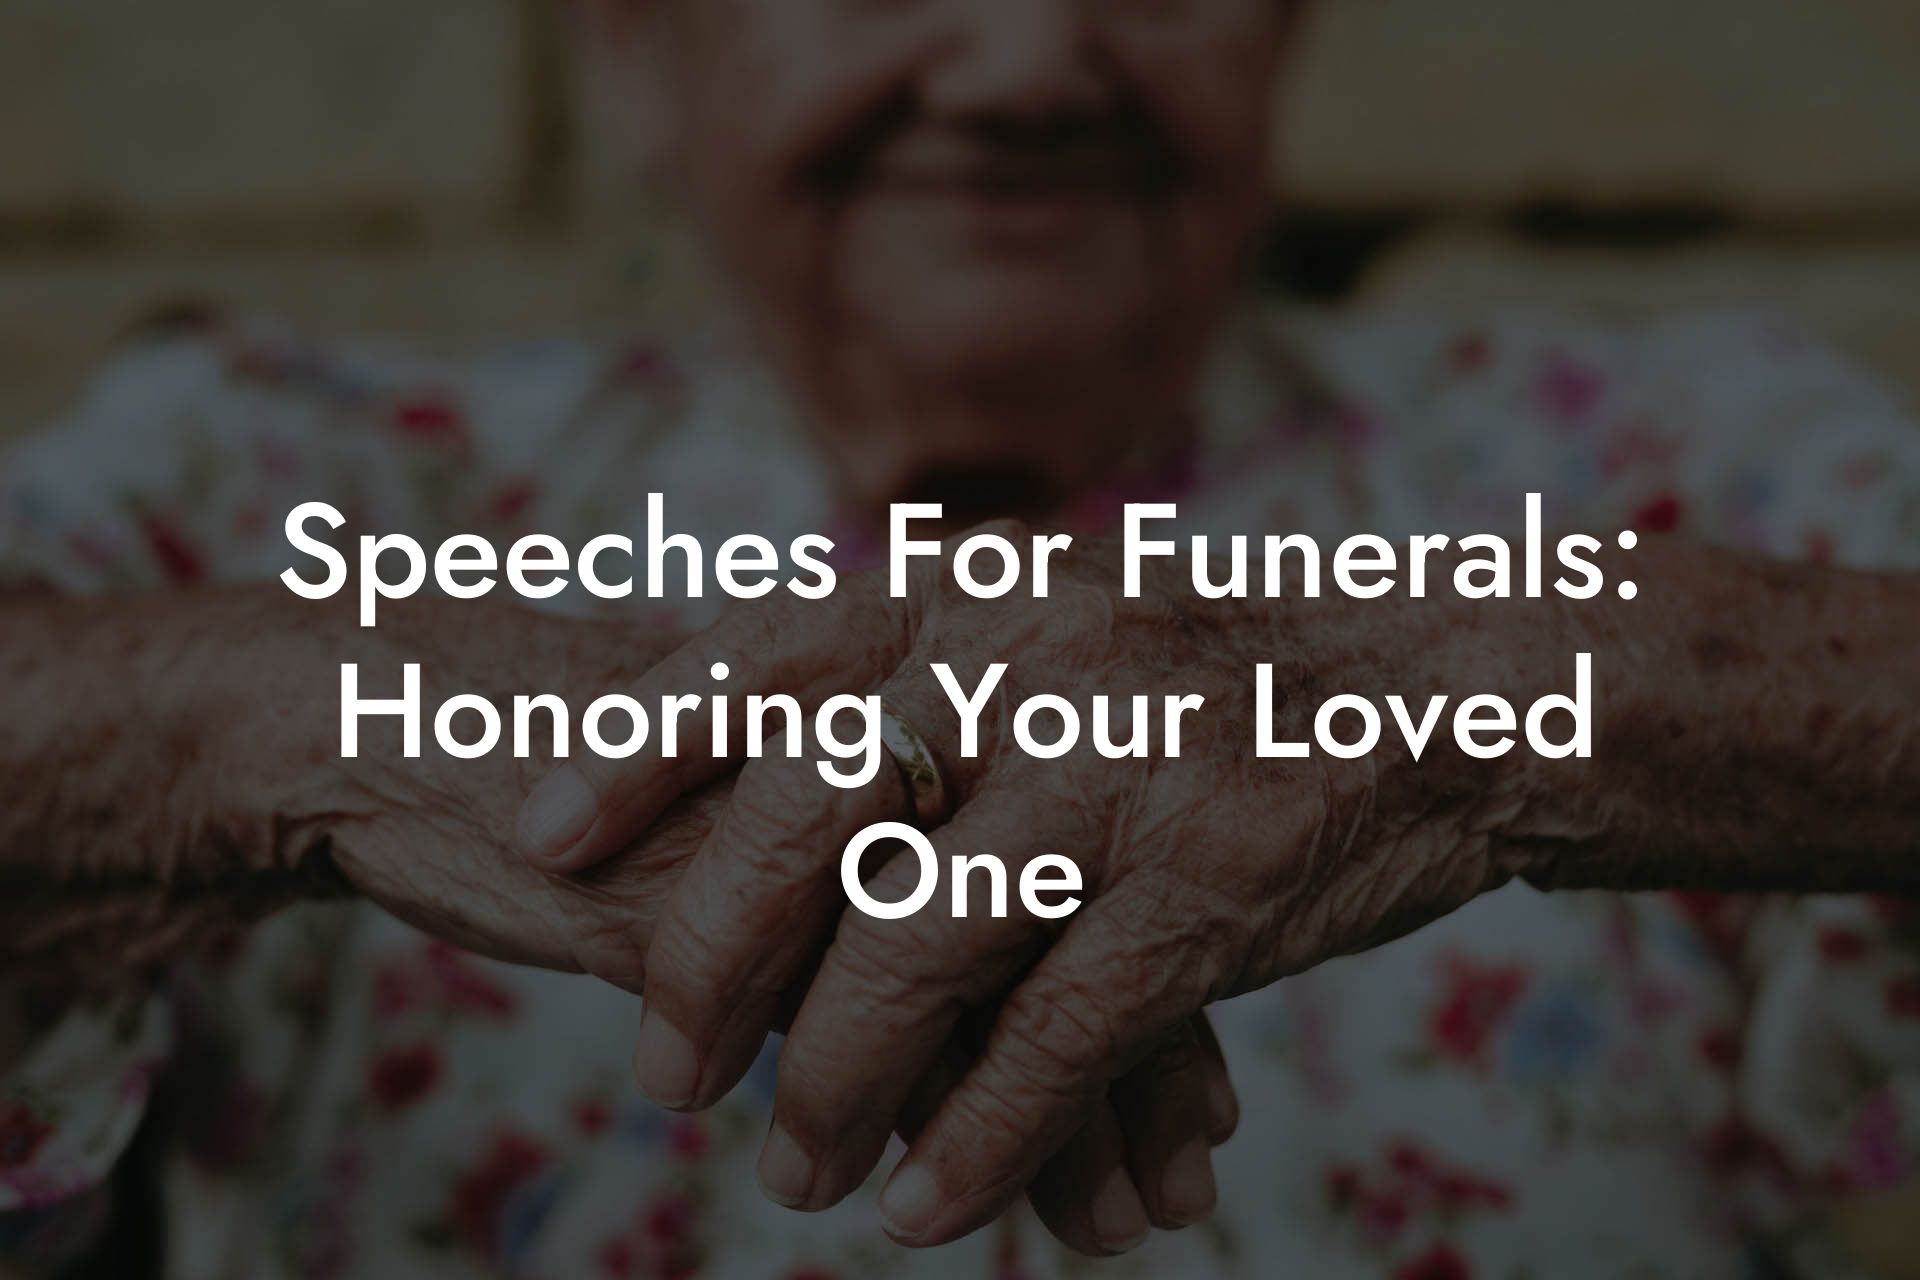 Speeches For Funerals: Honoring Your Loved One